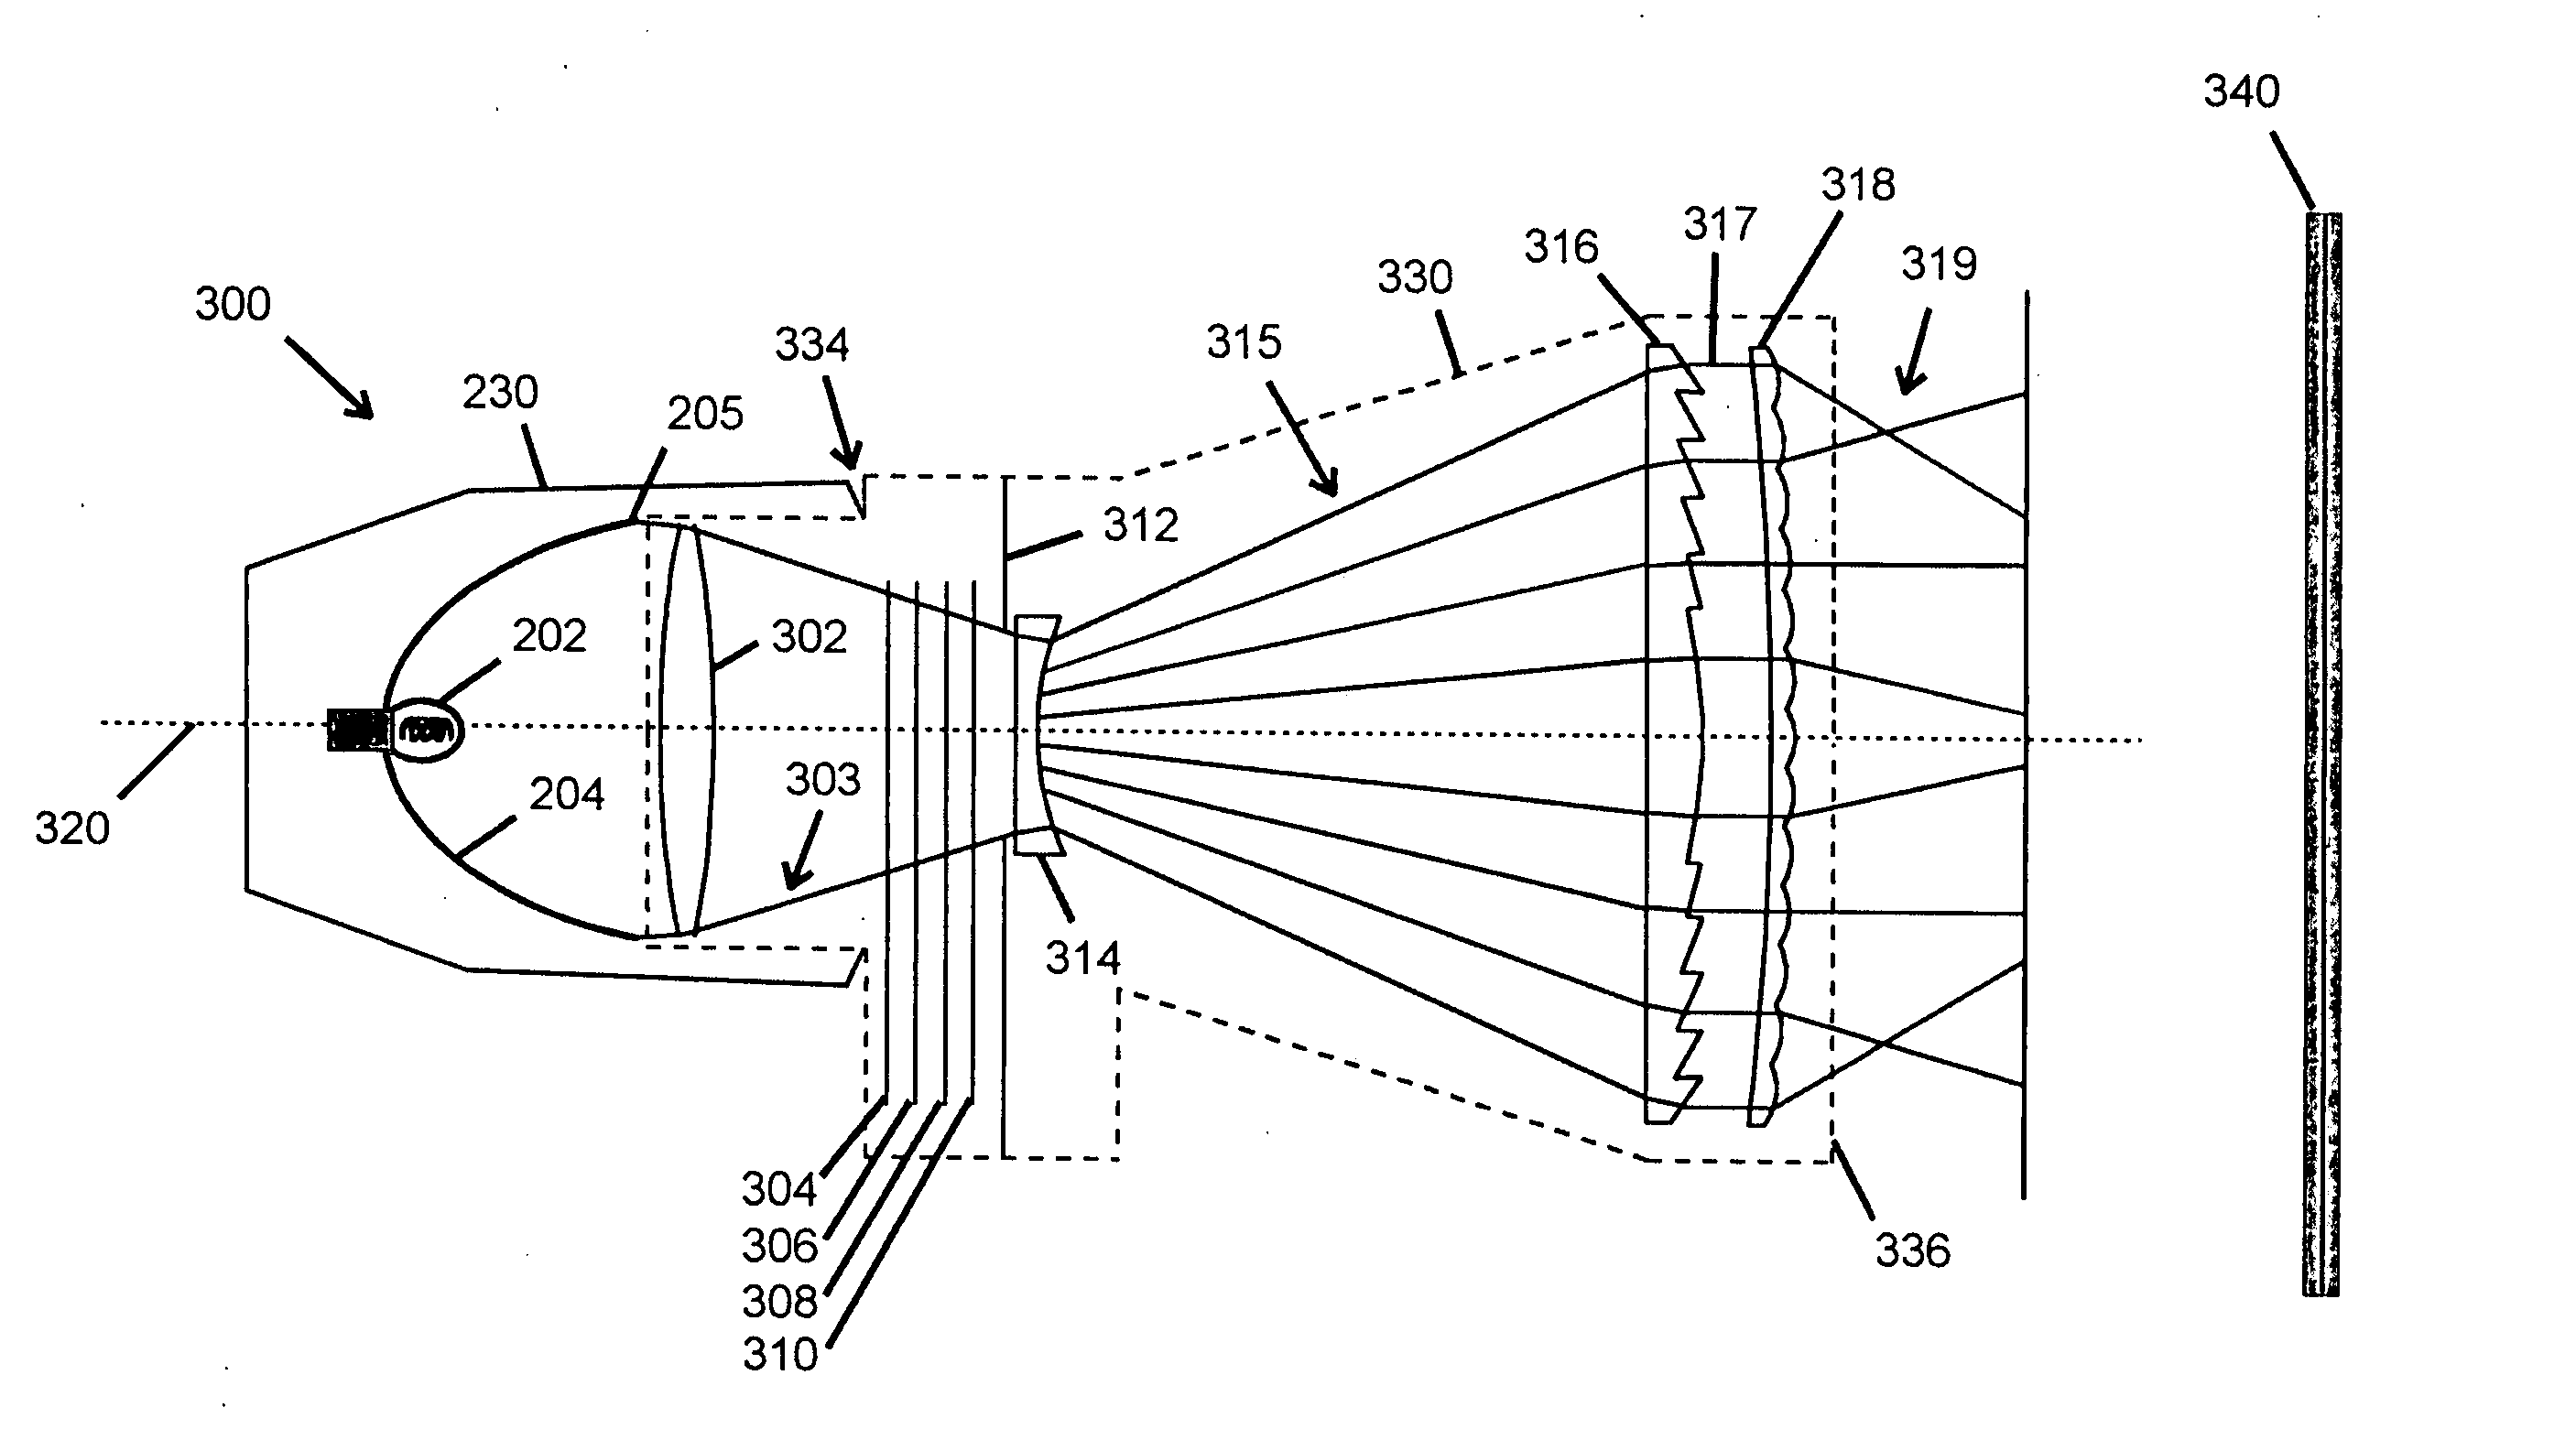 Optical system for a wash light